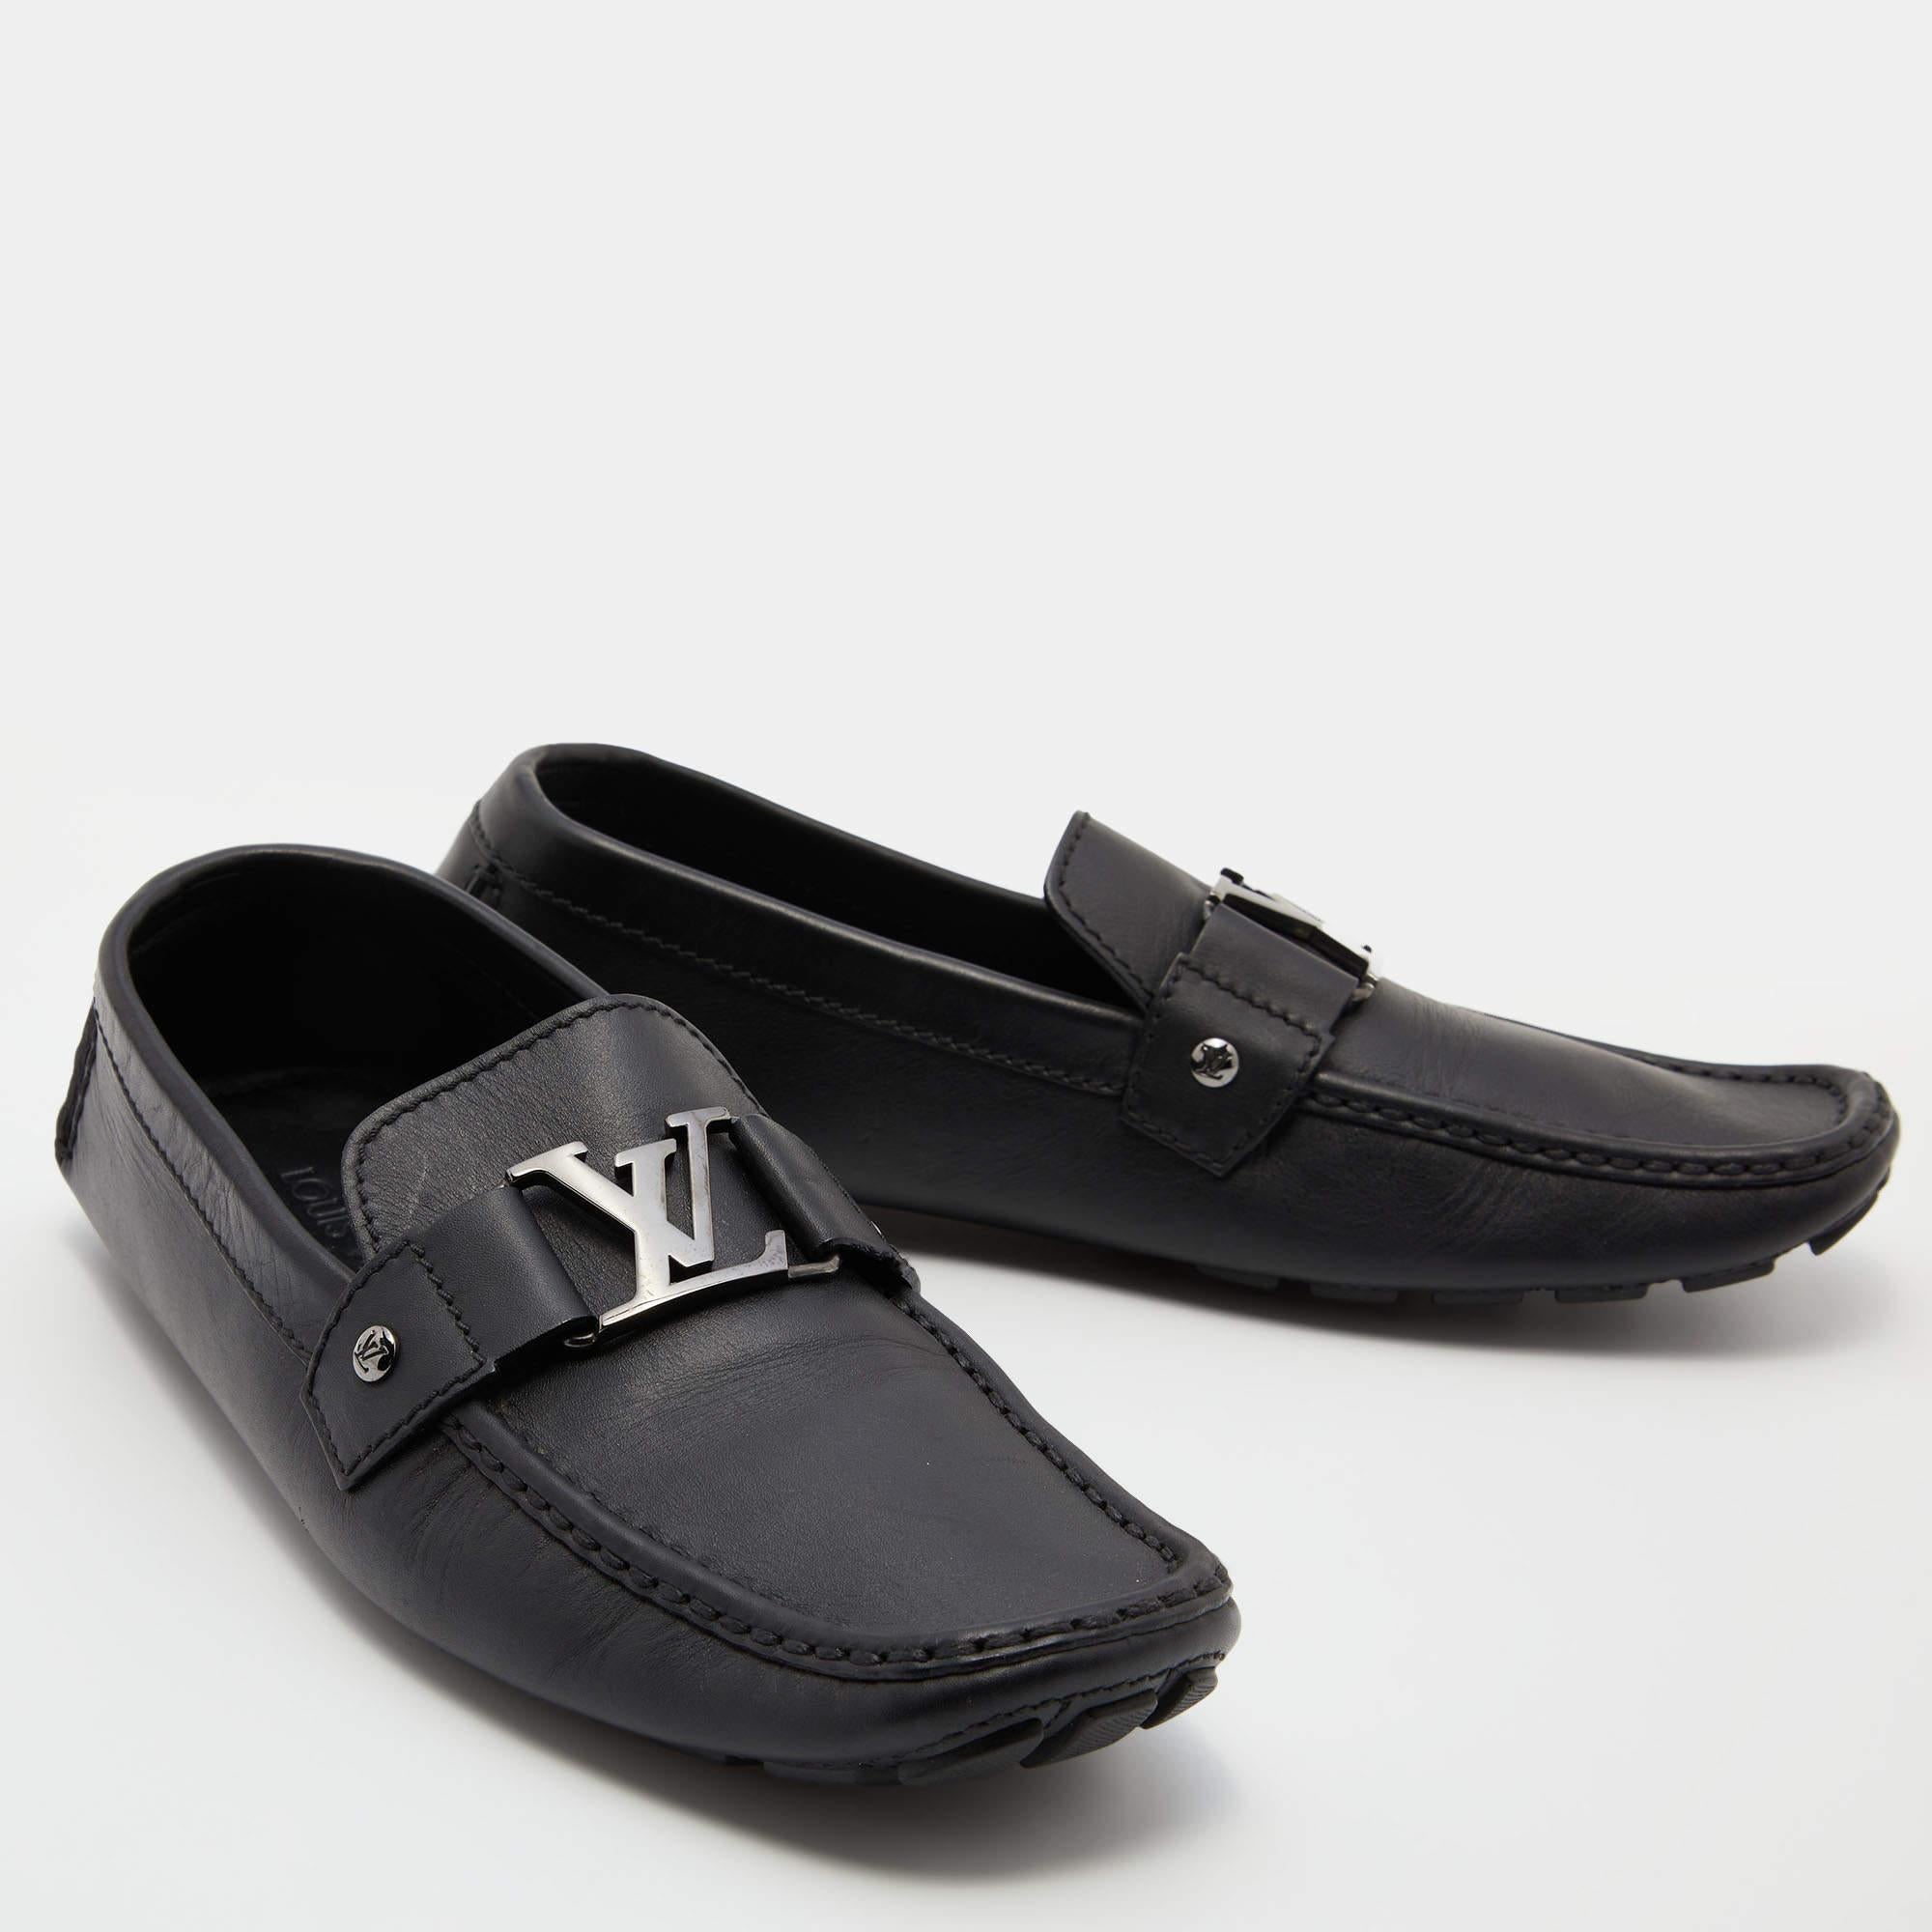 Louis Vuitton Black Leather Monte Carlo Slip On Loafers Size 43 1